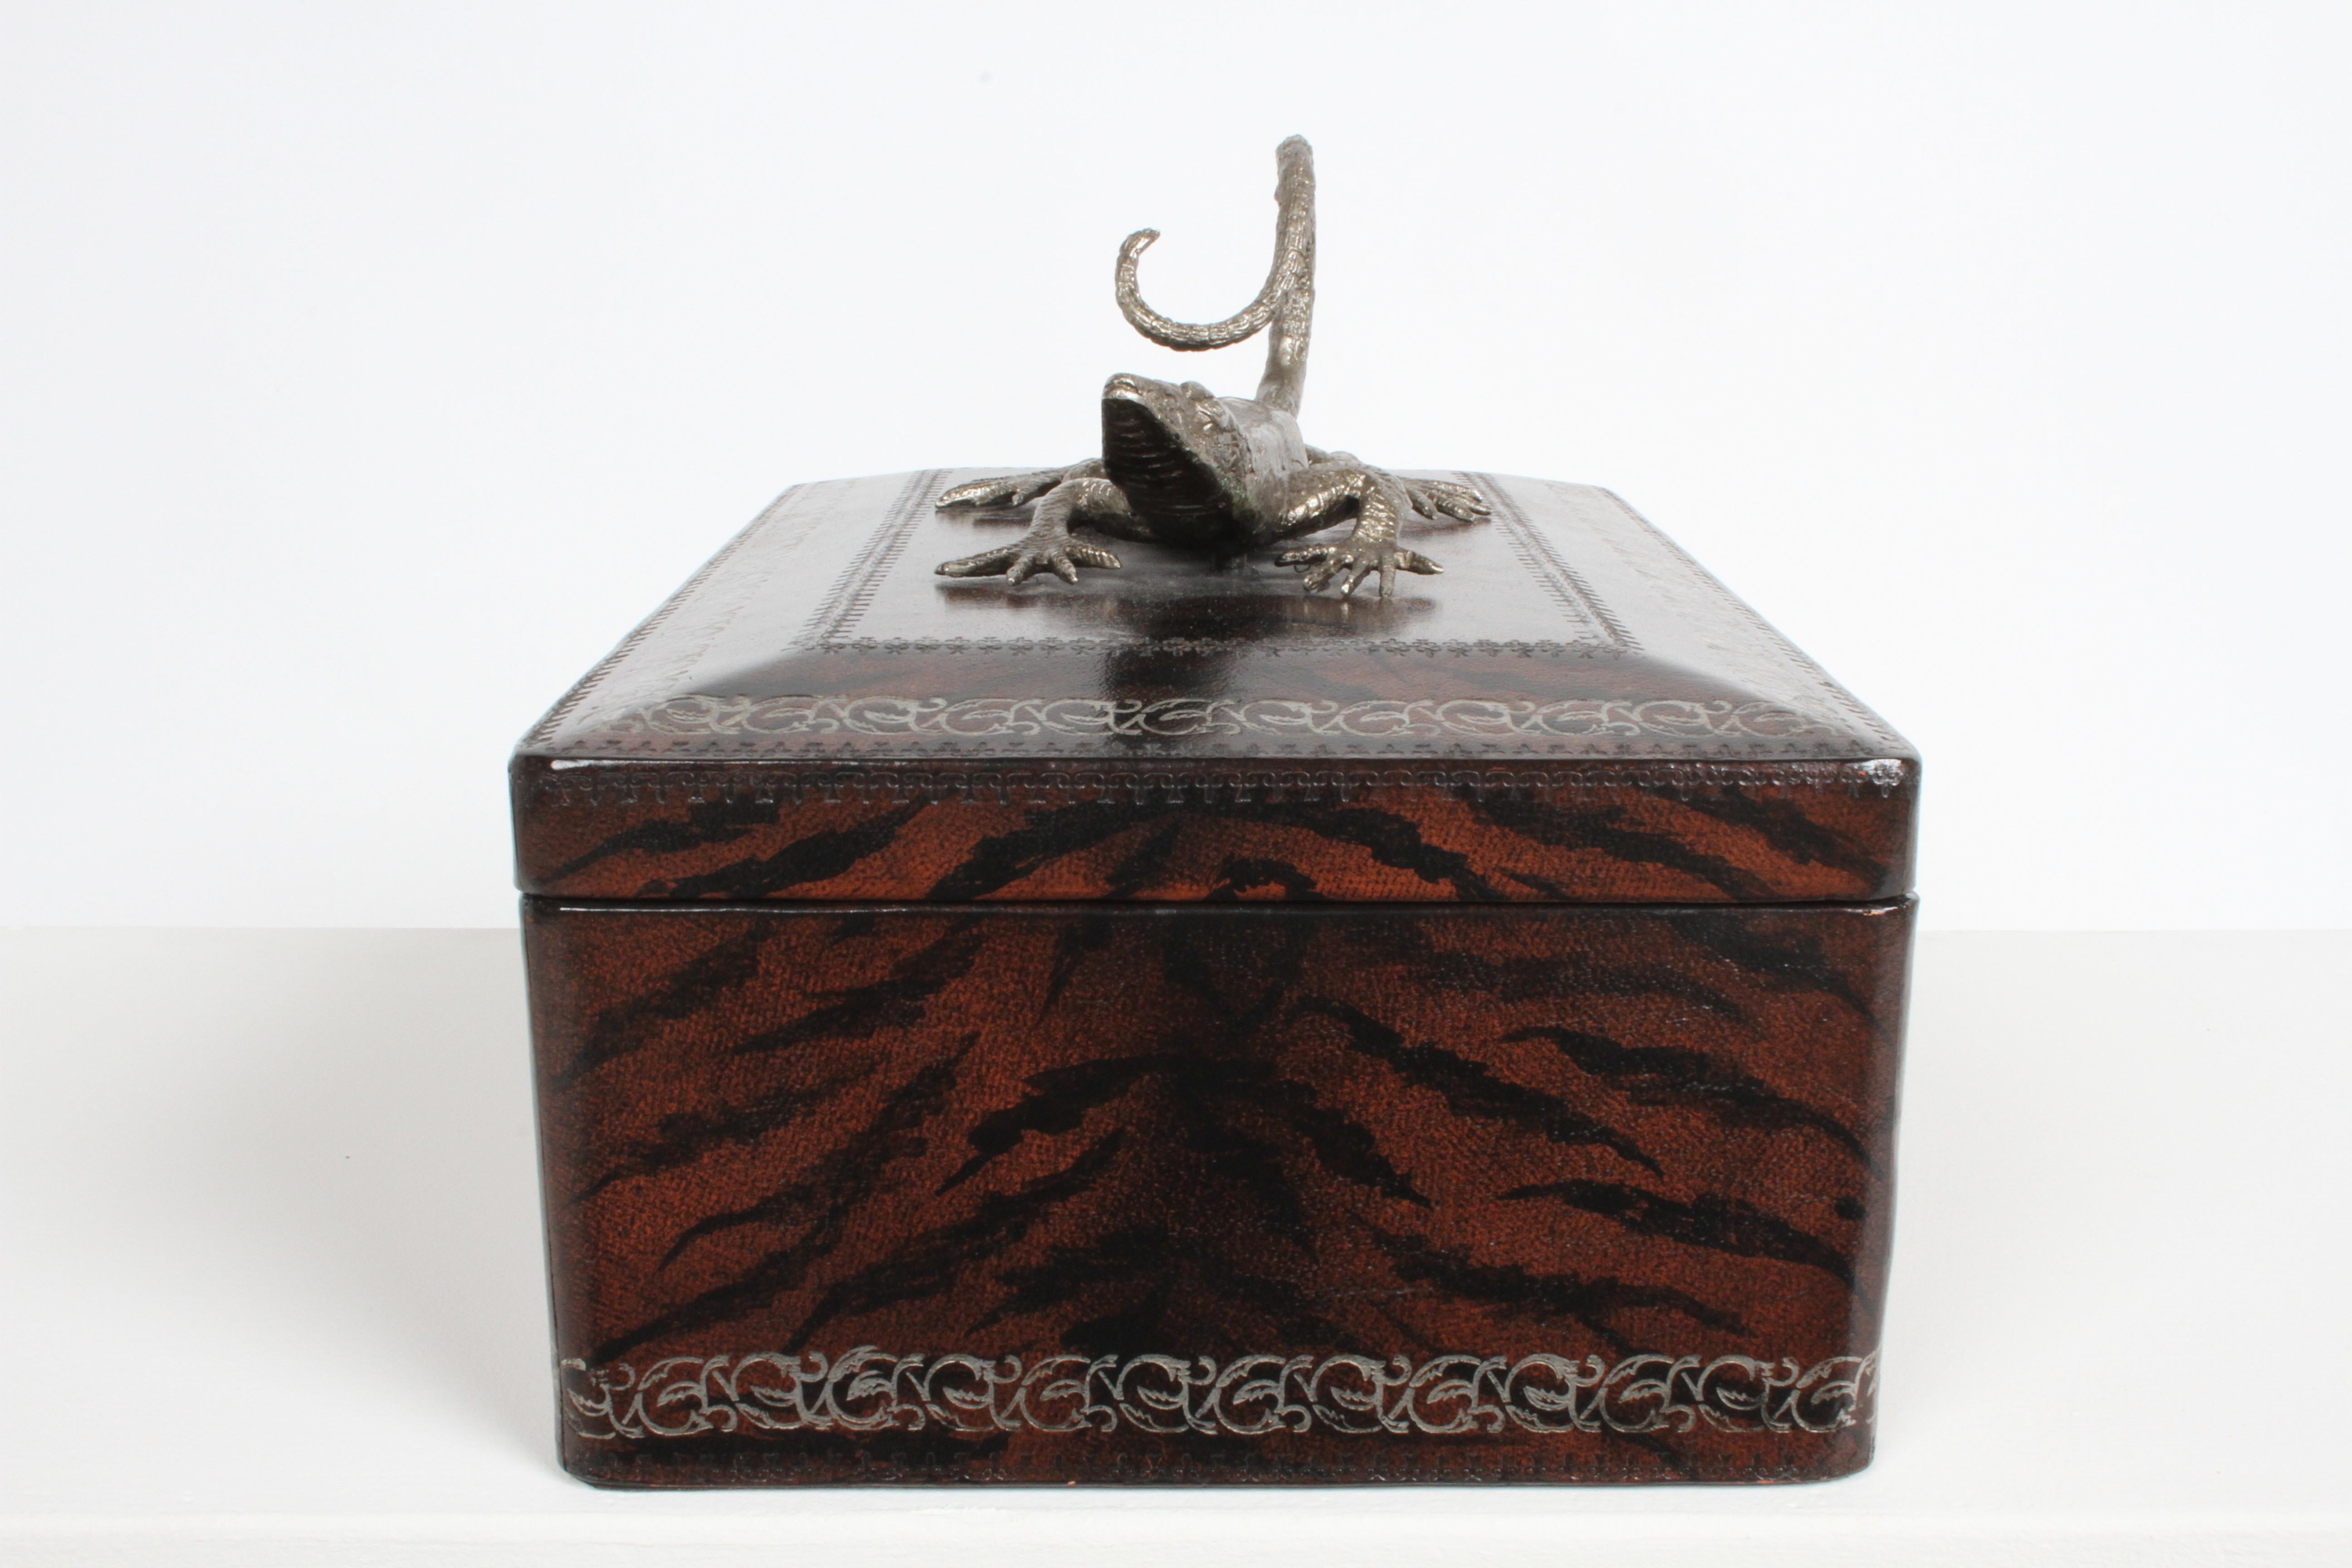 Hollywood Regency Maitland-Smith Faux Skin Leather Wrapped Box with Silver Tone Metal Lizard